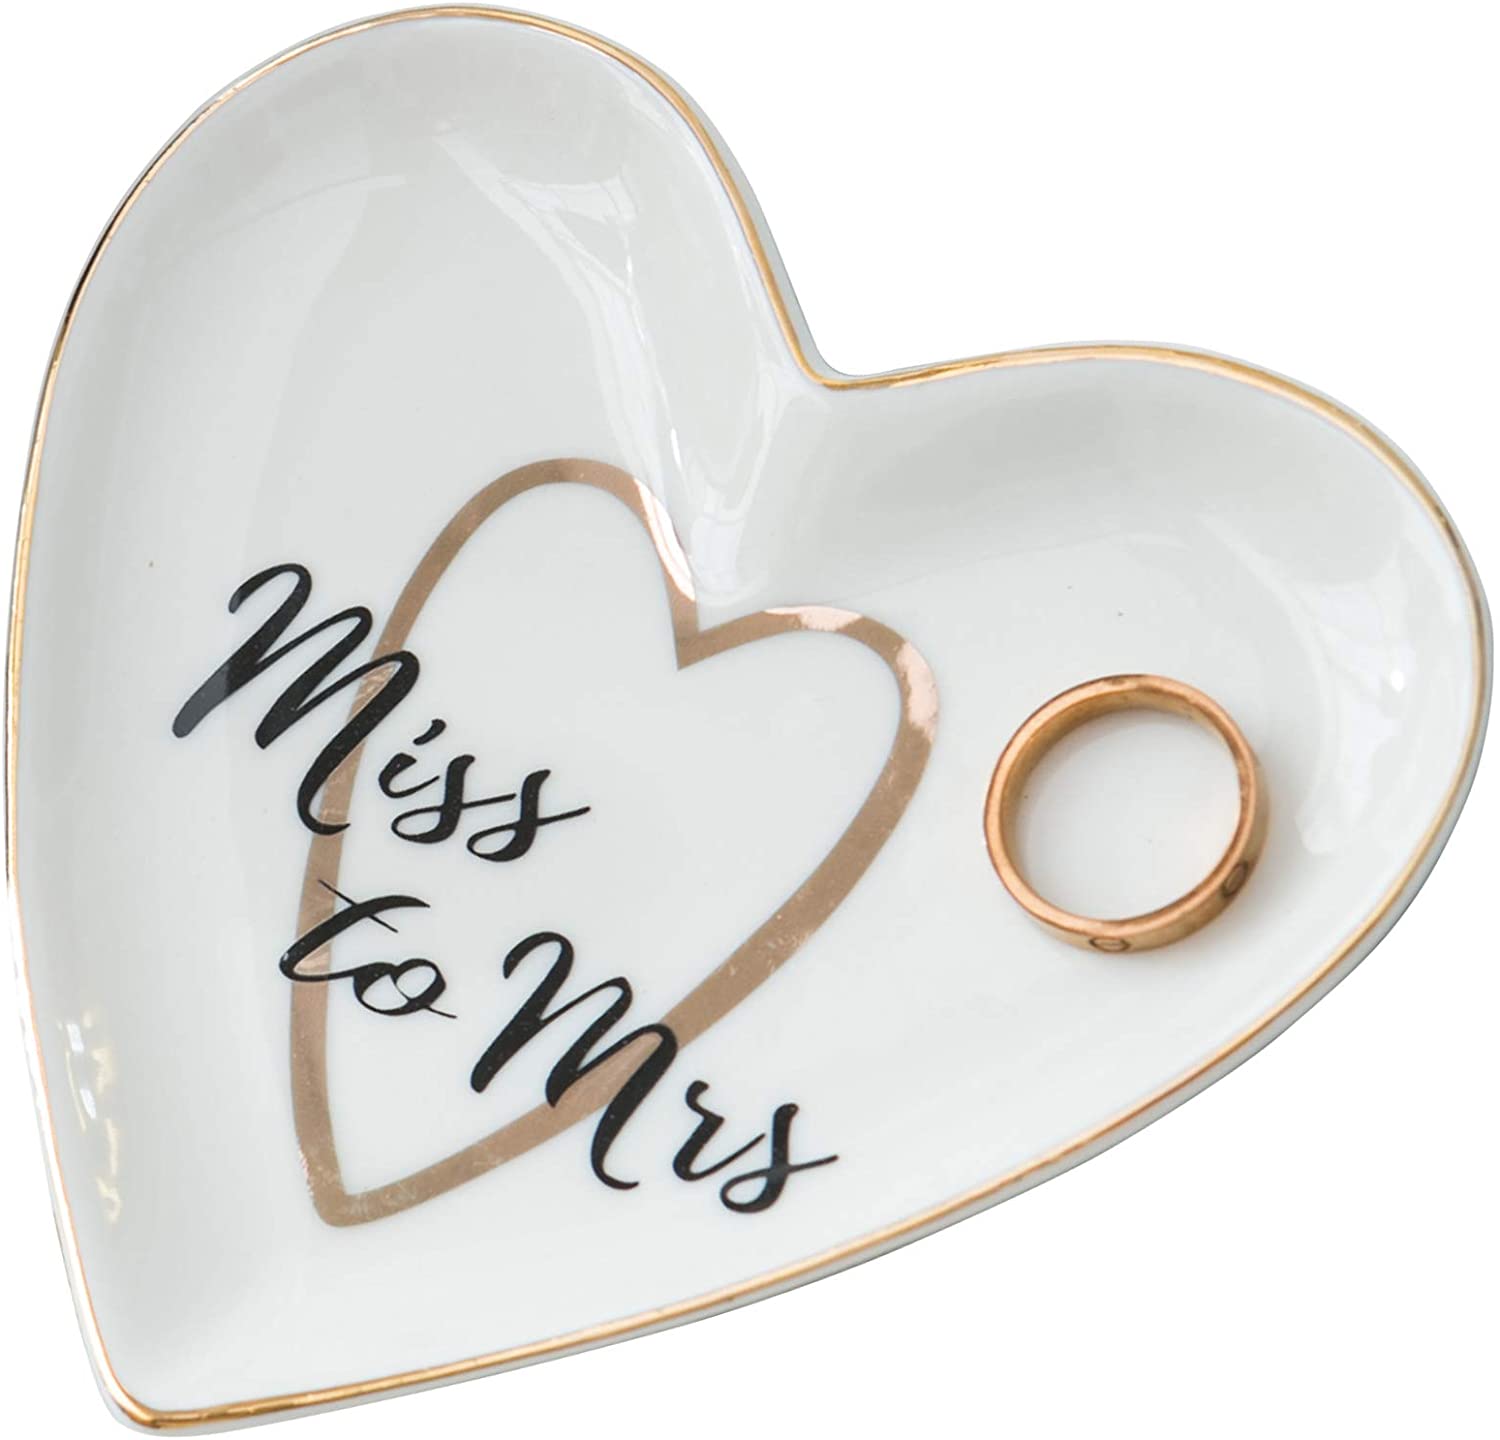 Tenforie Ring Dish Jewelry Holder Trinket Tray Ceramic Plate All of Me Loves All of You Jewelry Organizer Home Decor Dish for Birthday Wedding Mothers Day Christmas etc. 